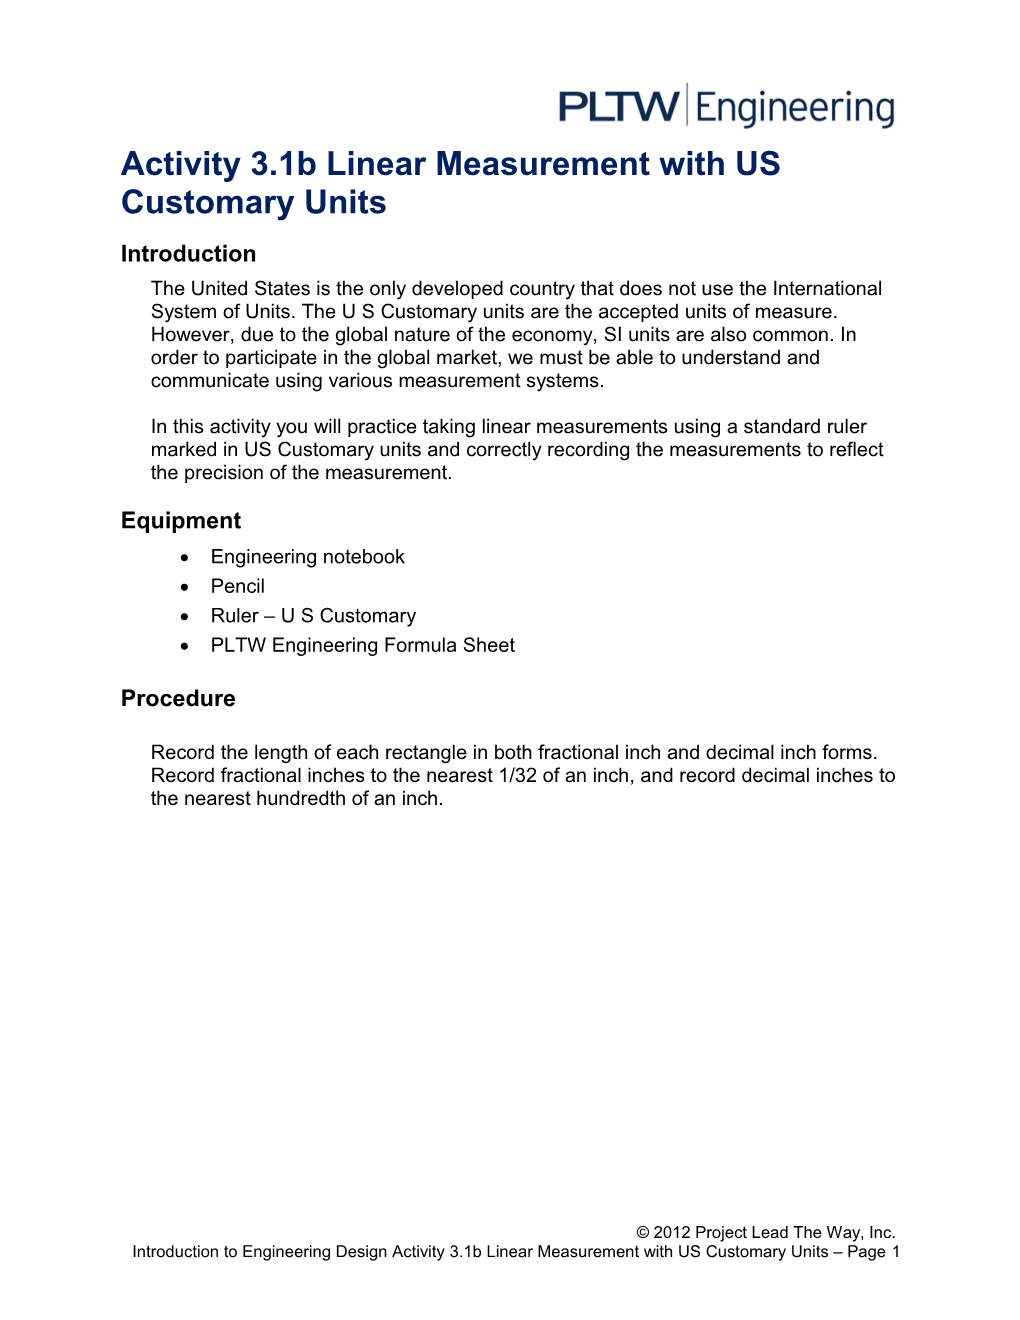 Activity 3.1B Linear Measurement with US Customary Units